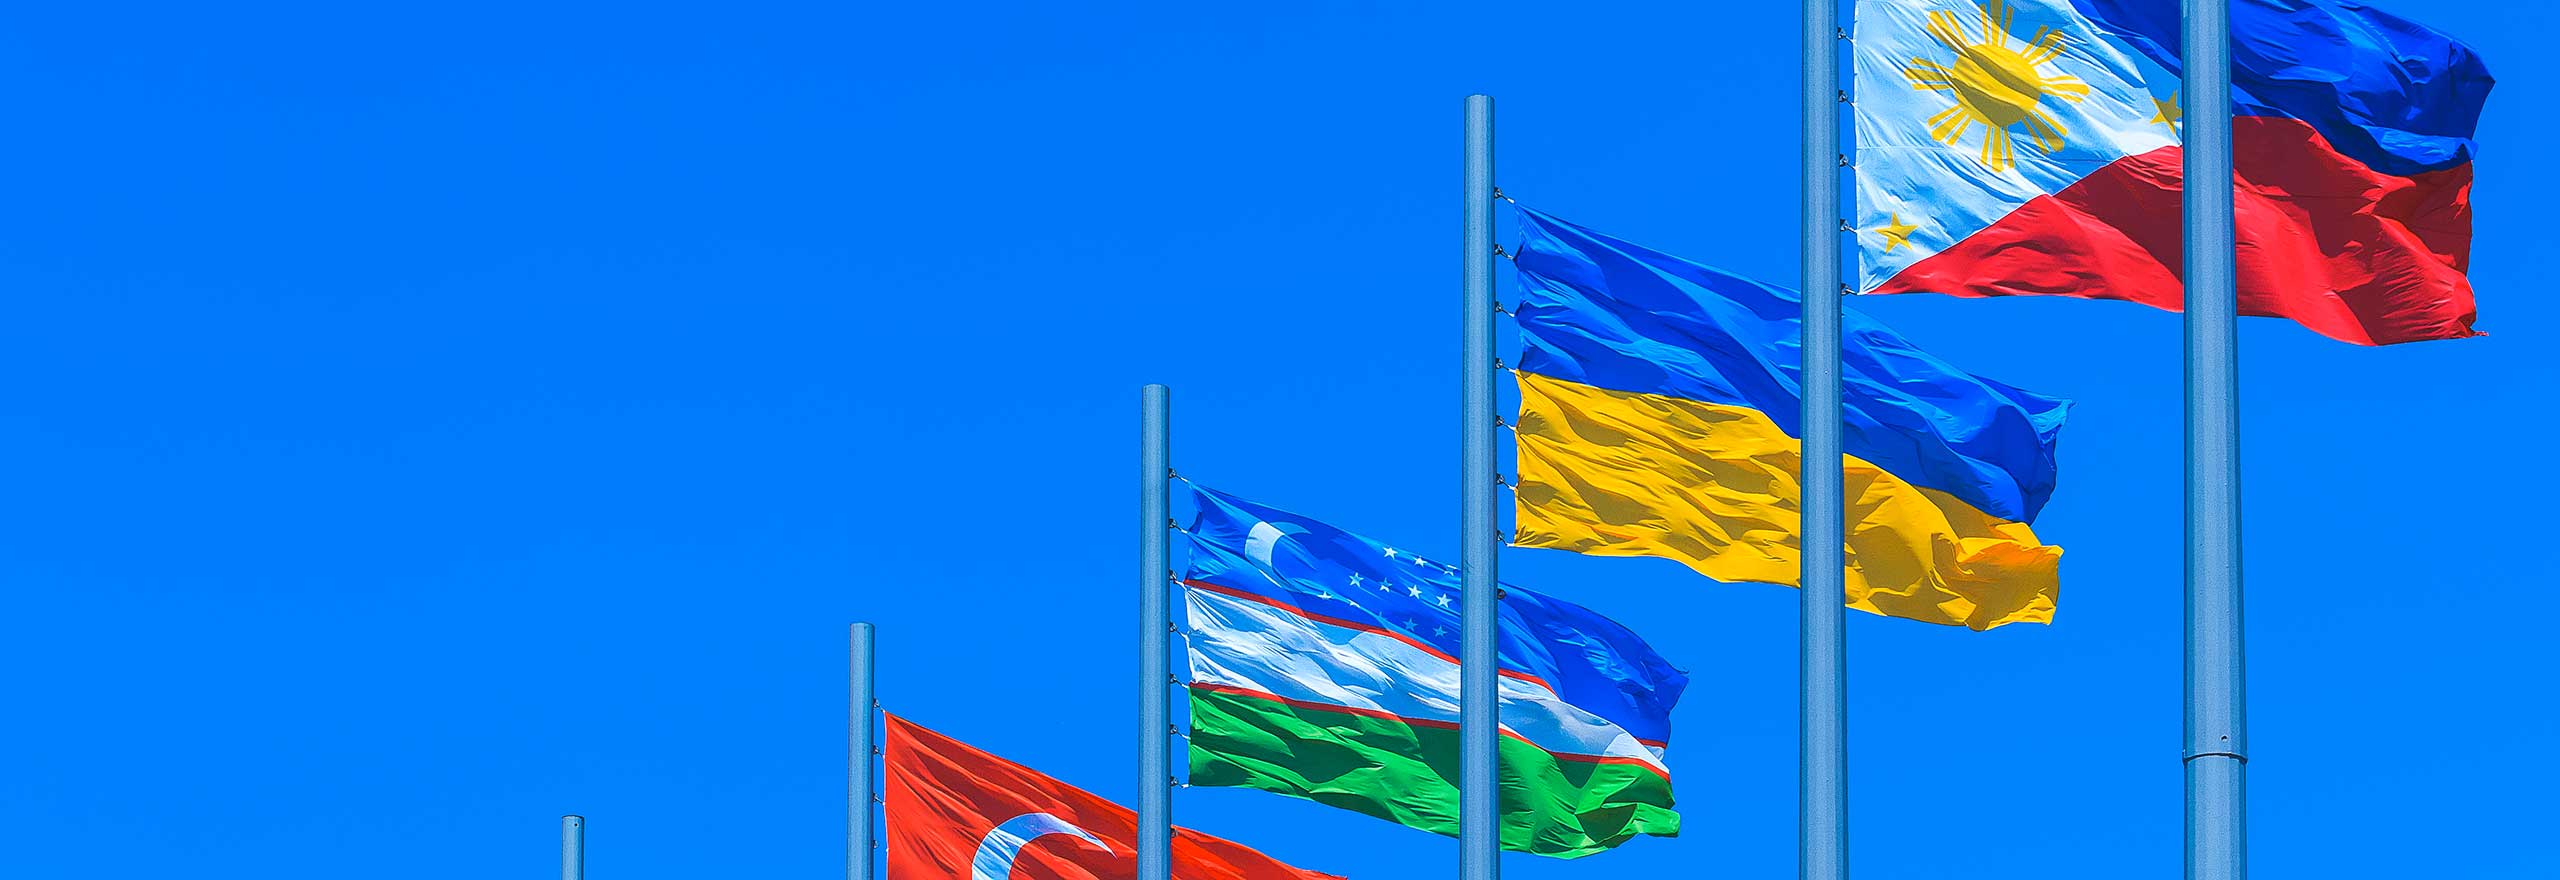 Multi-national flags flying under a blue sky